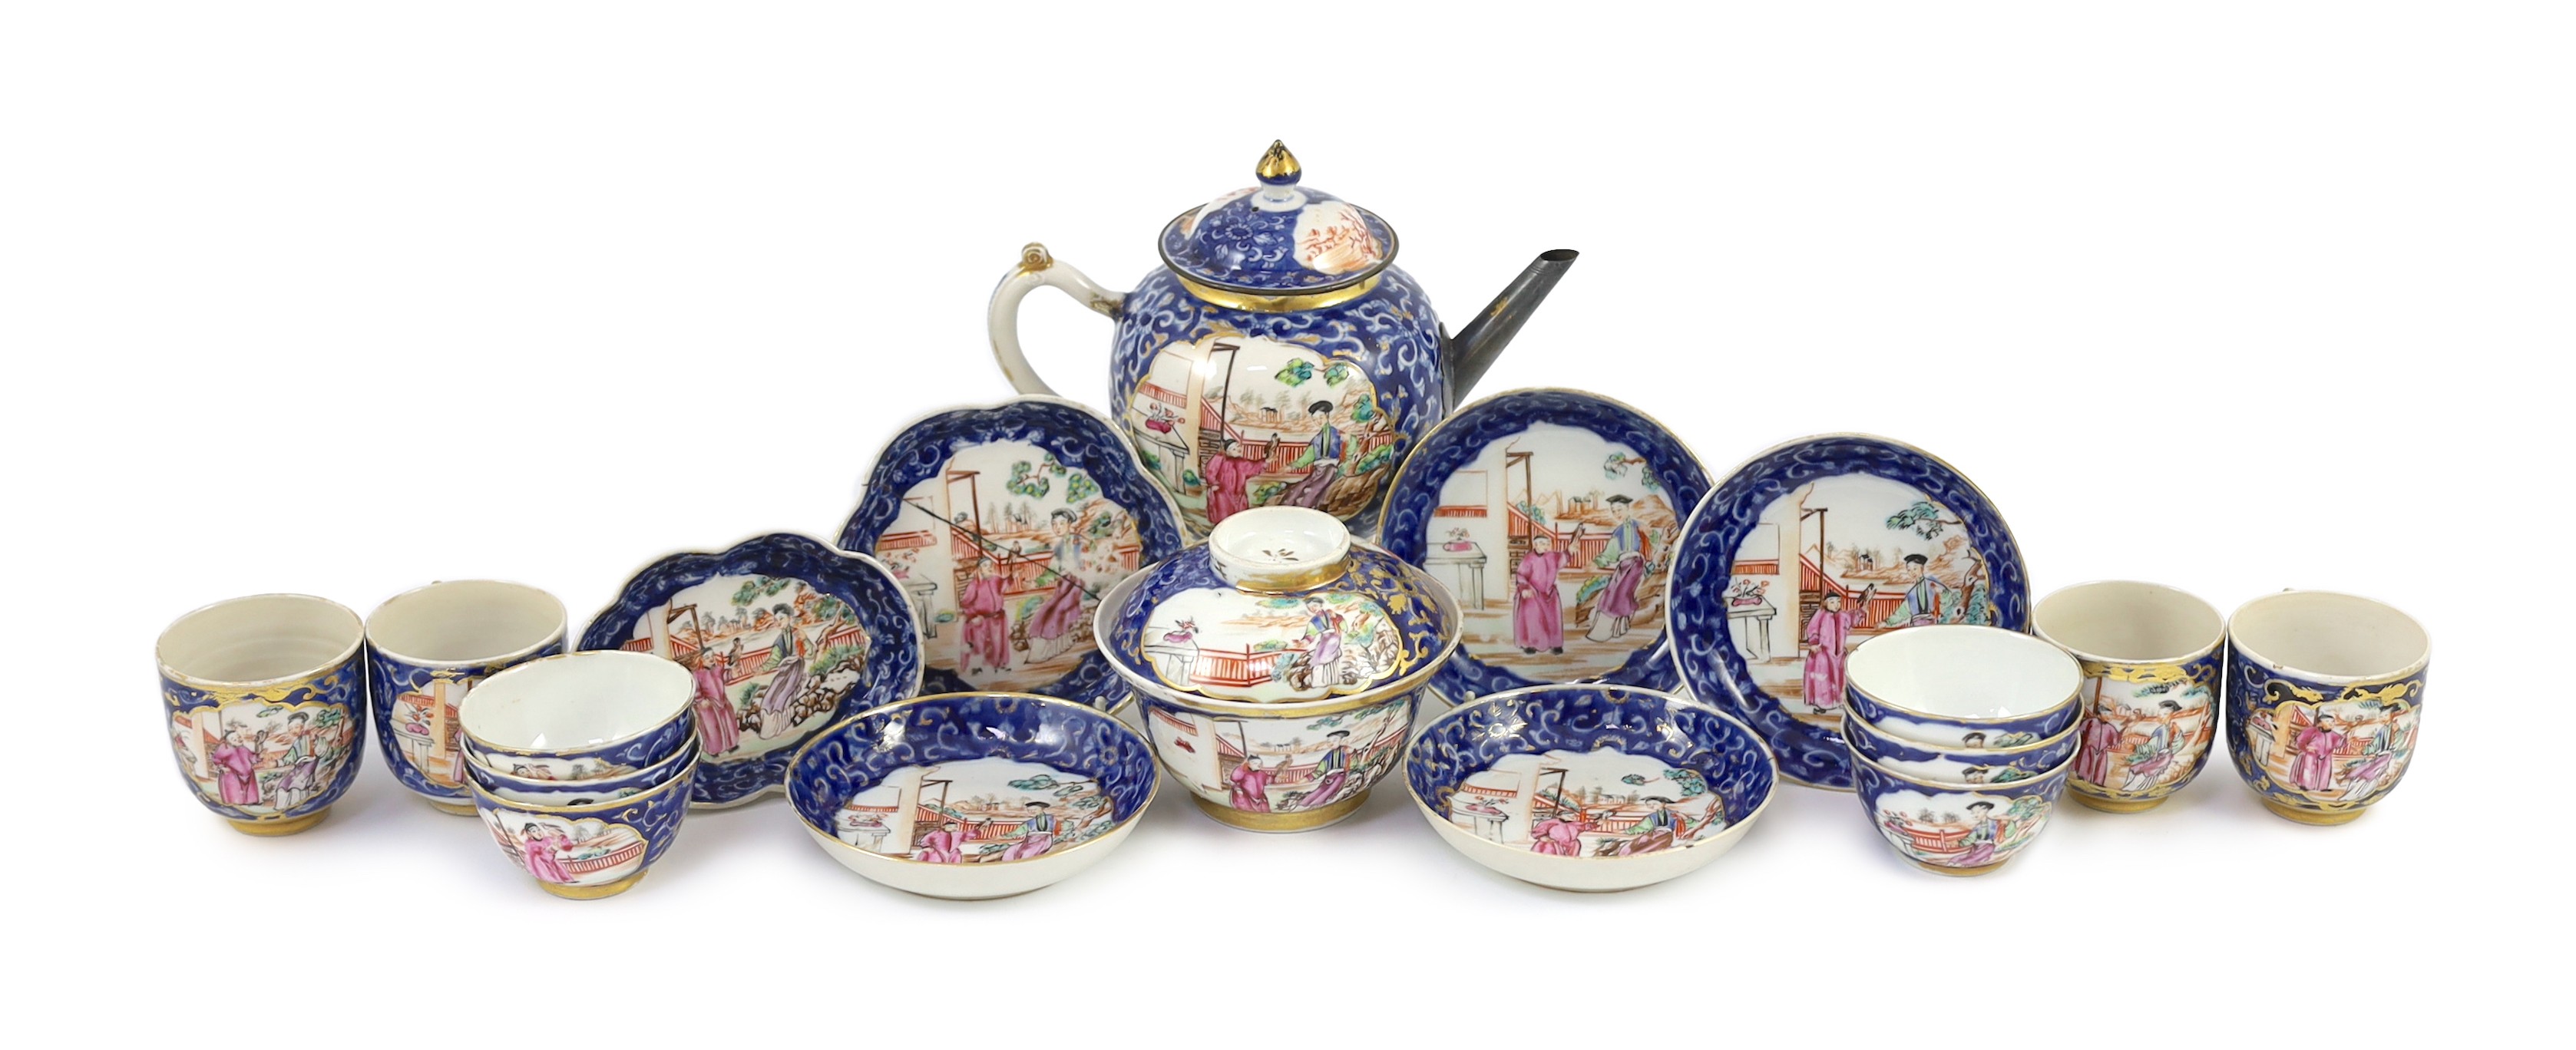 A Chinese export famille rose part tea and coffee set, Qianlong period, teapot 15cm high, some damage and wear to gilding                                                                                                   